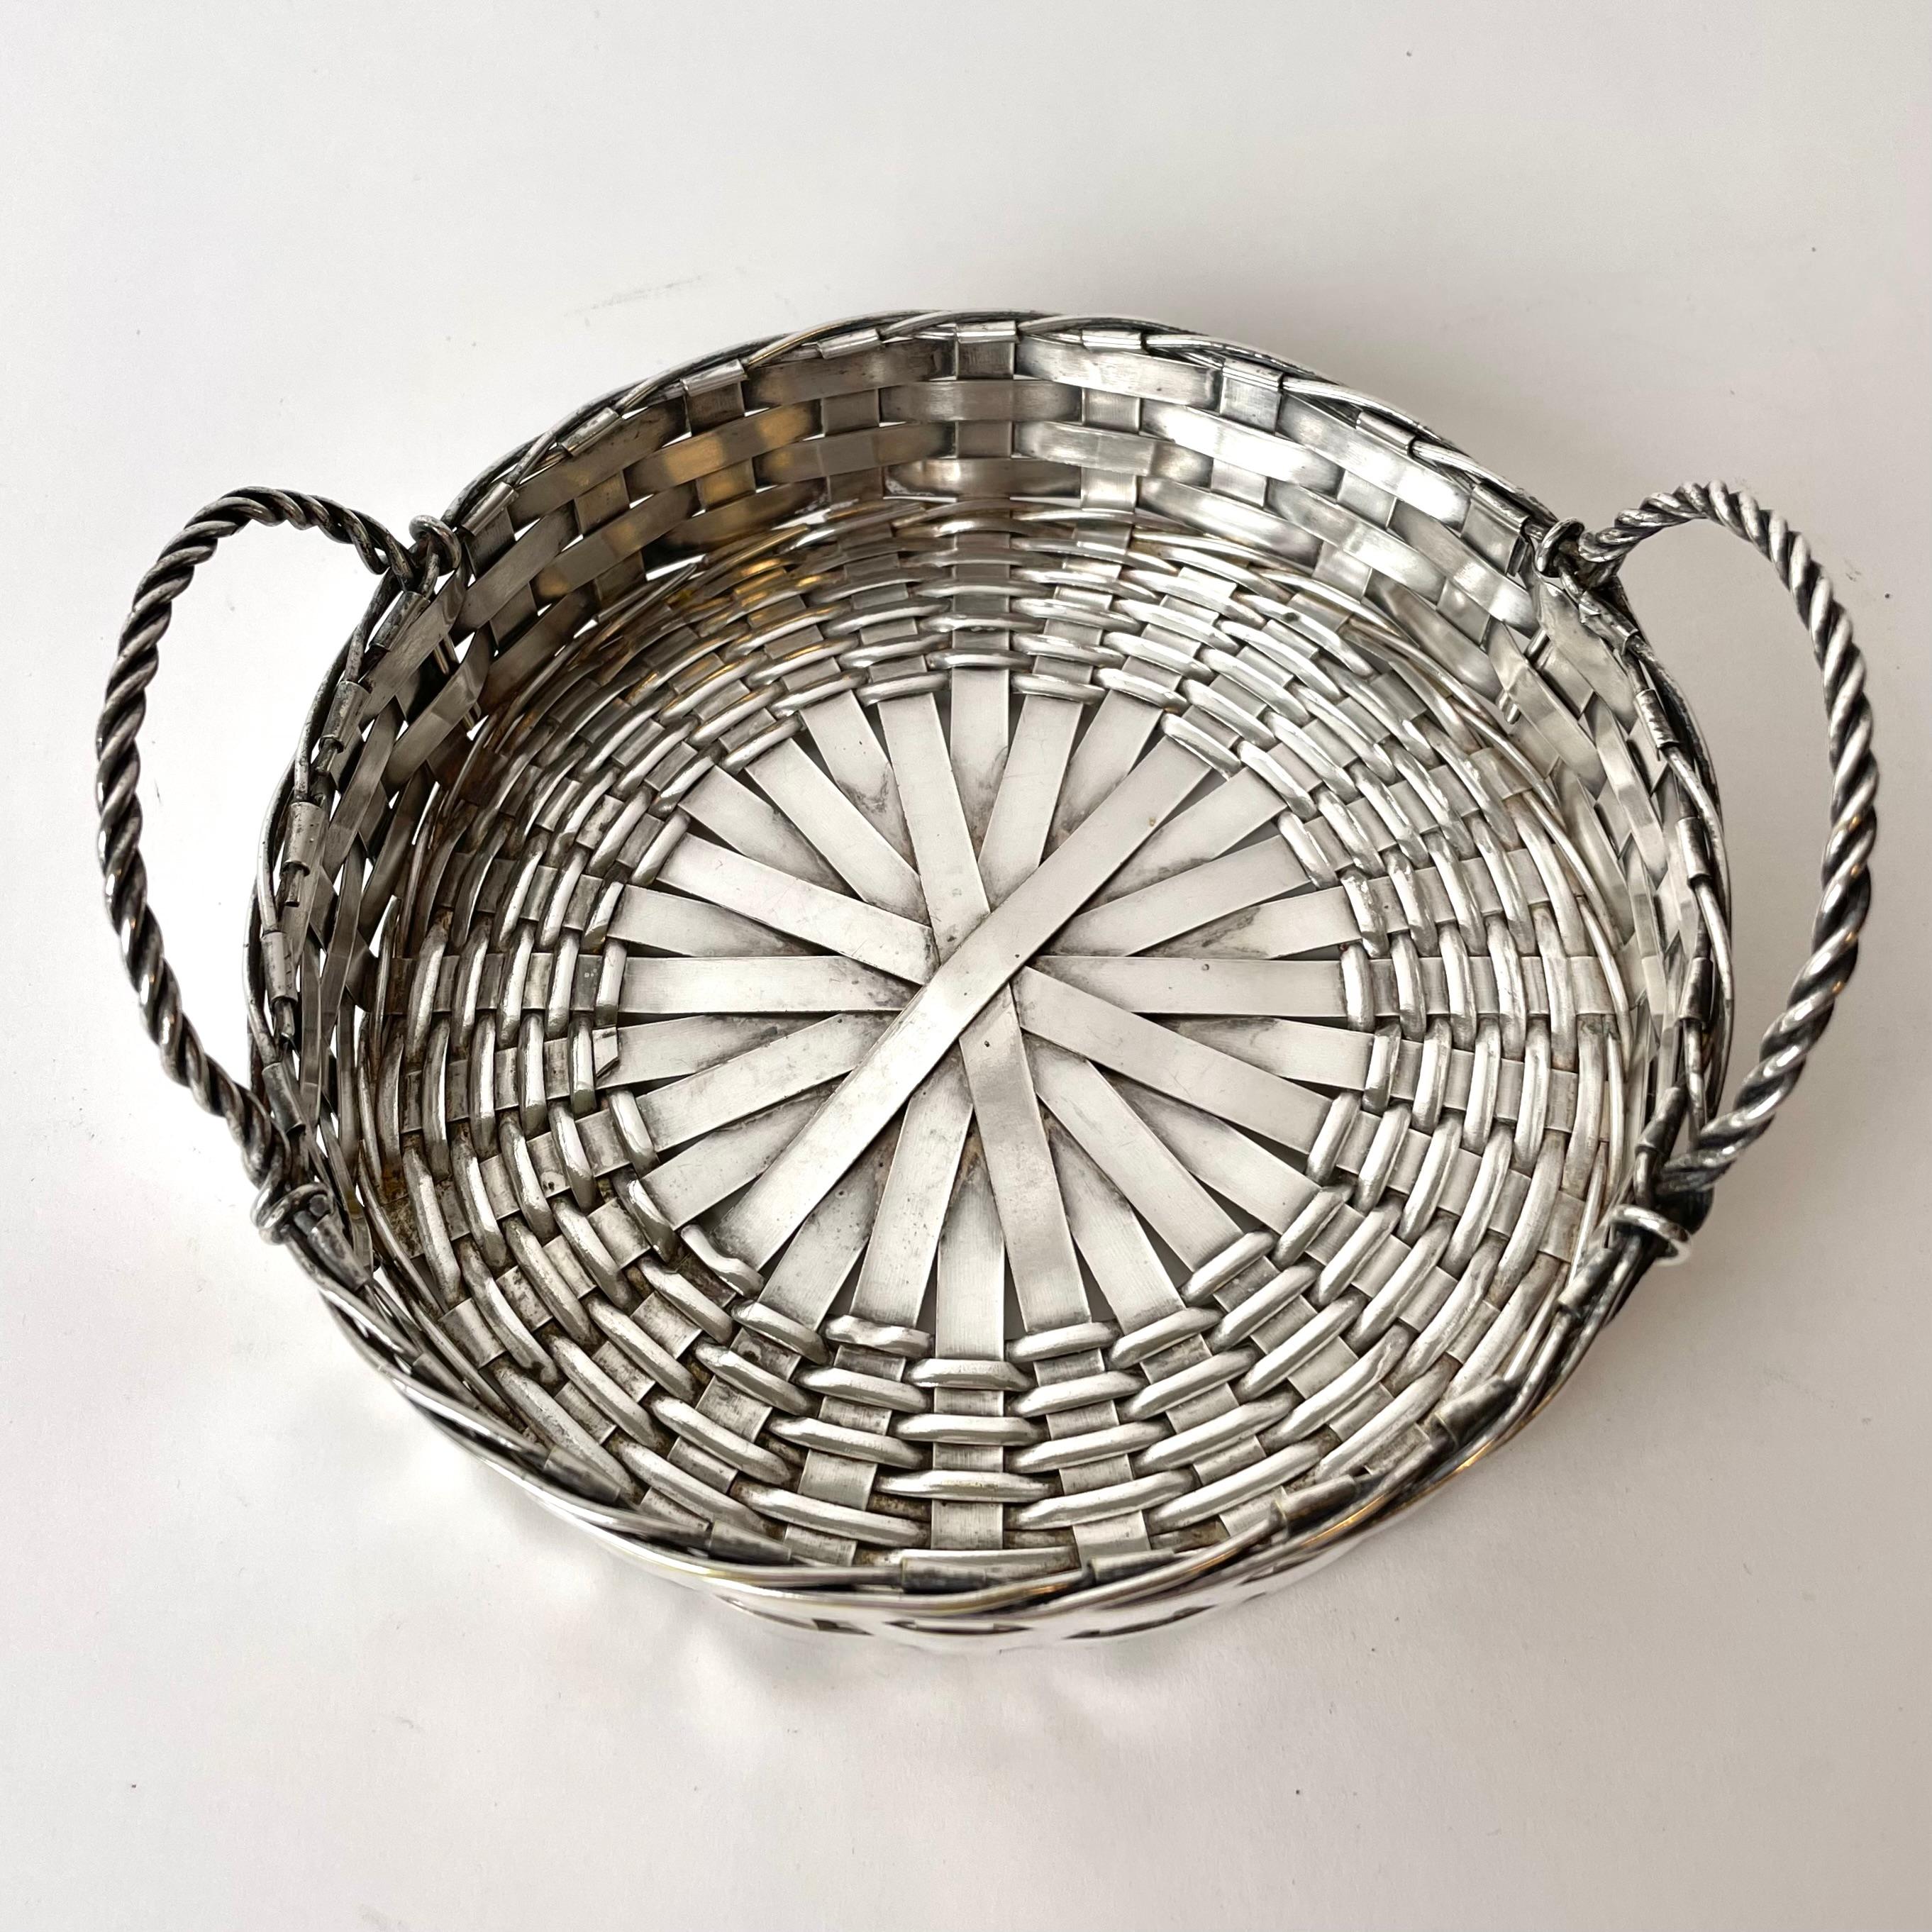 European Cool Coaster in Braided Silver Plated Metal from the, Early 20th Century For Sale